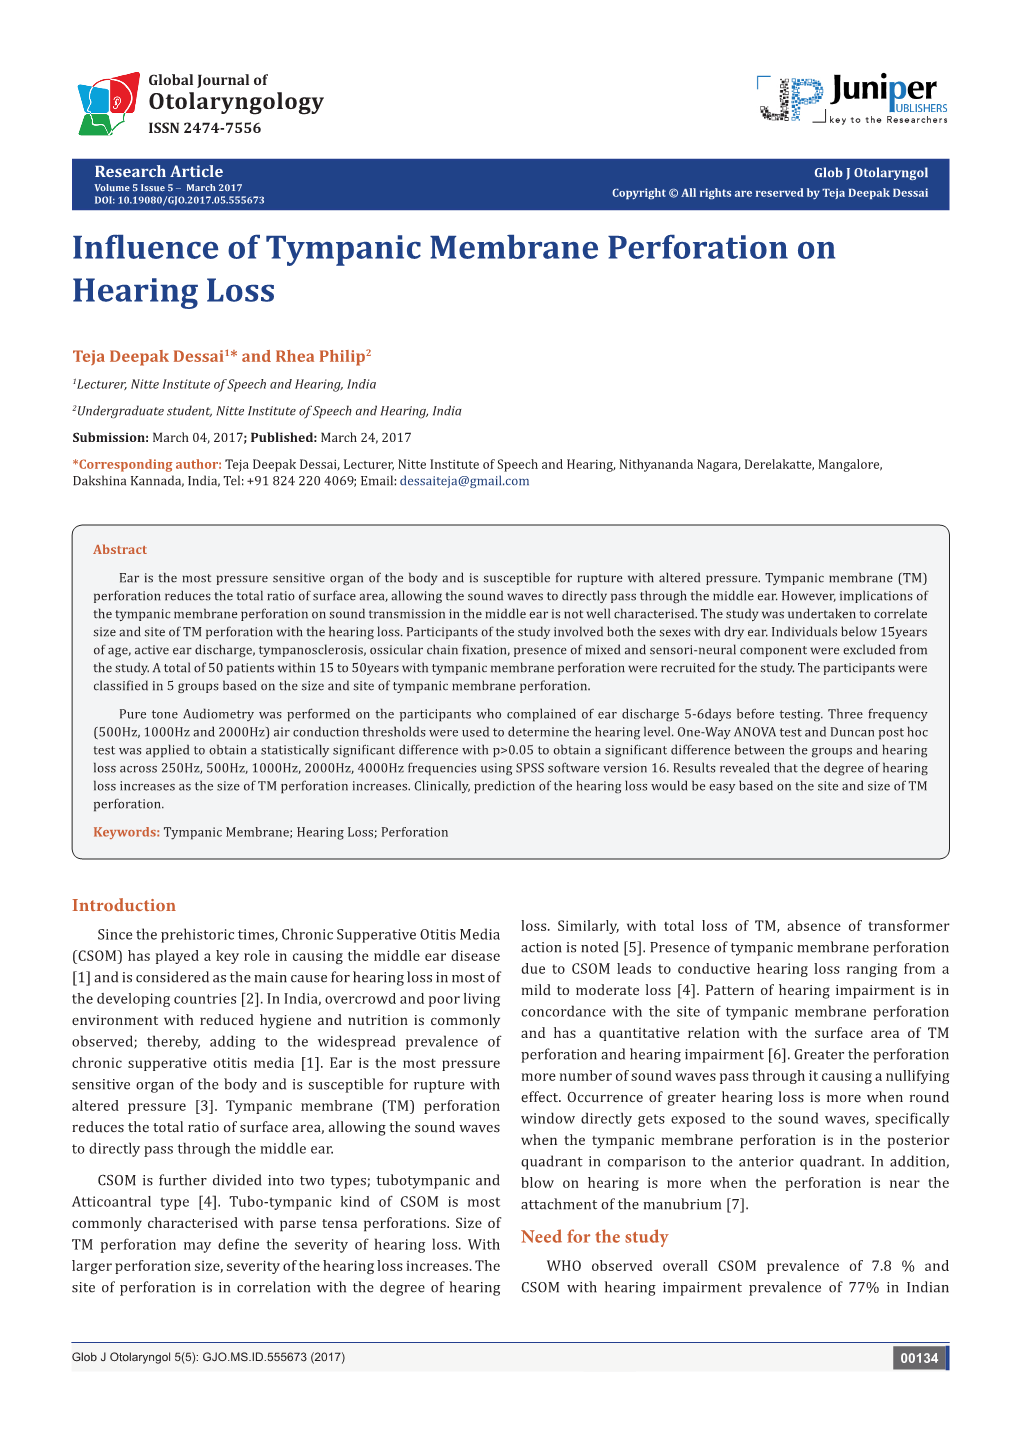 Influence of Tympanic Membrane Perforation on Hearing Loss